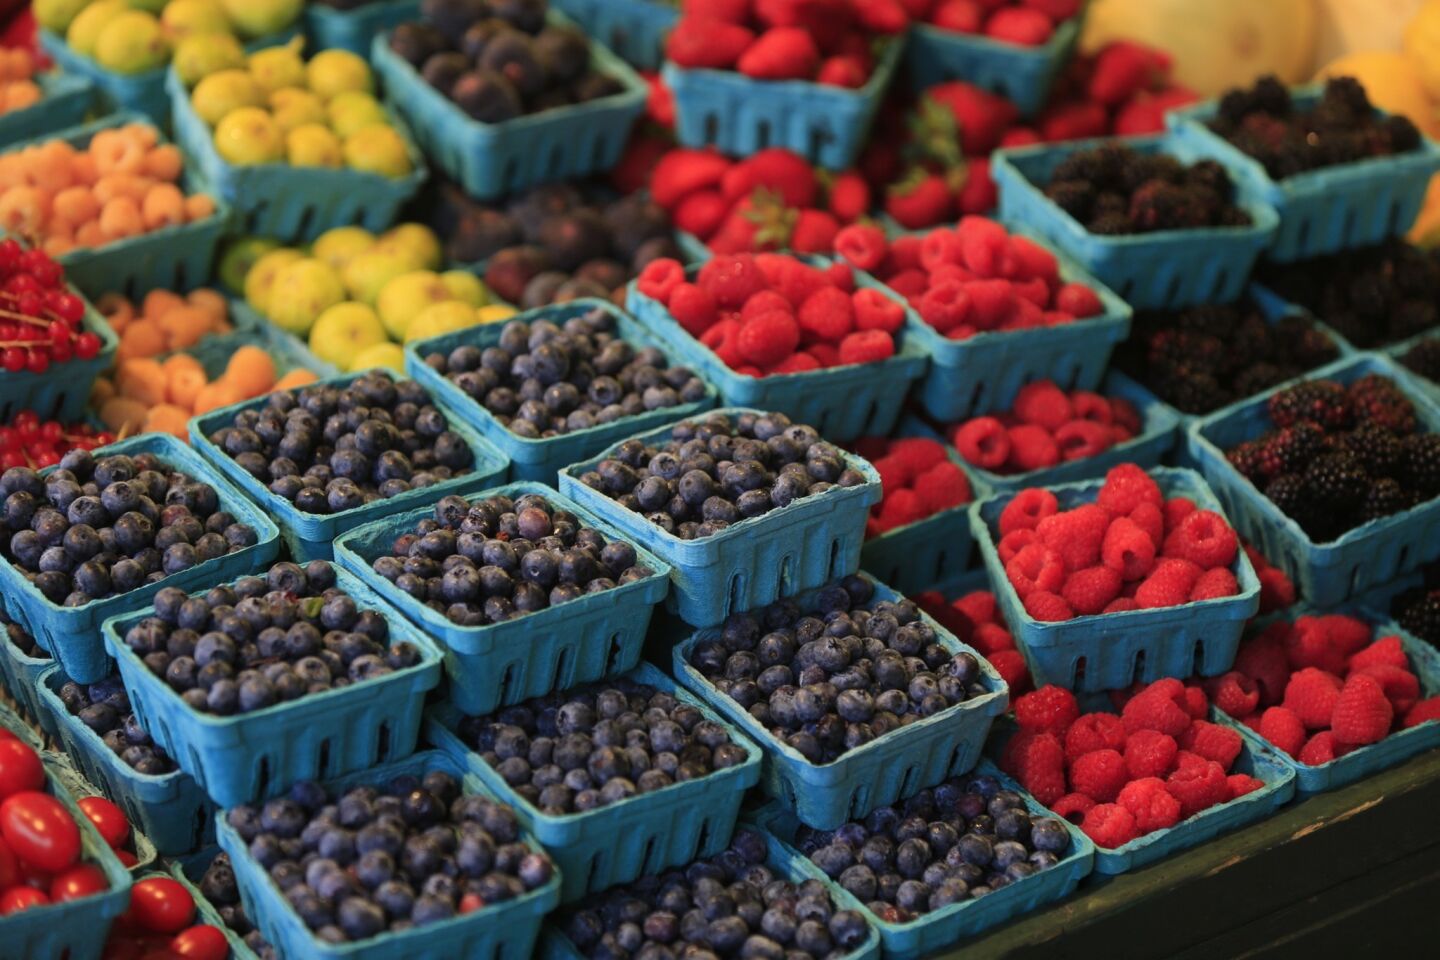 Fruits of varying shades brighten a produce stand.